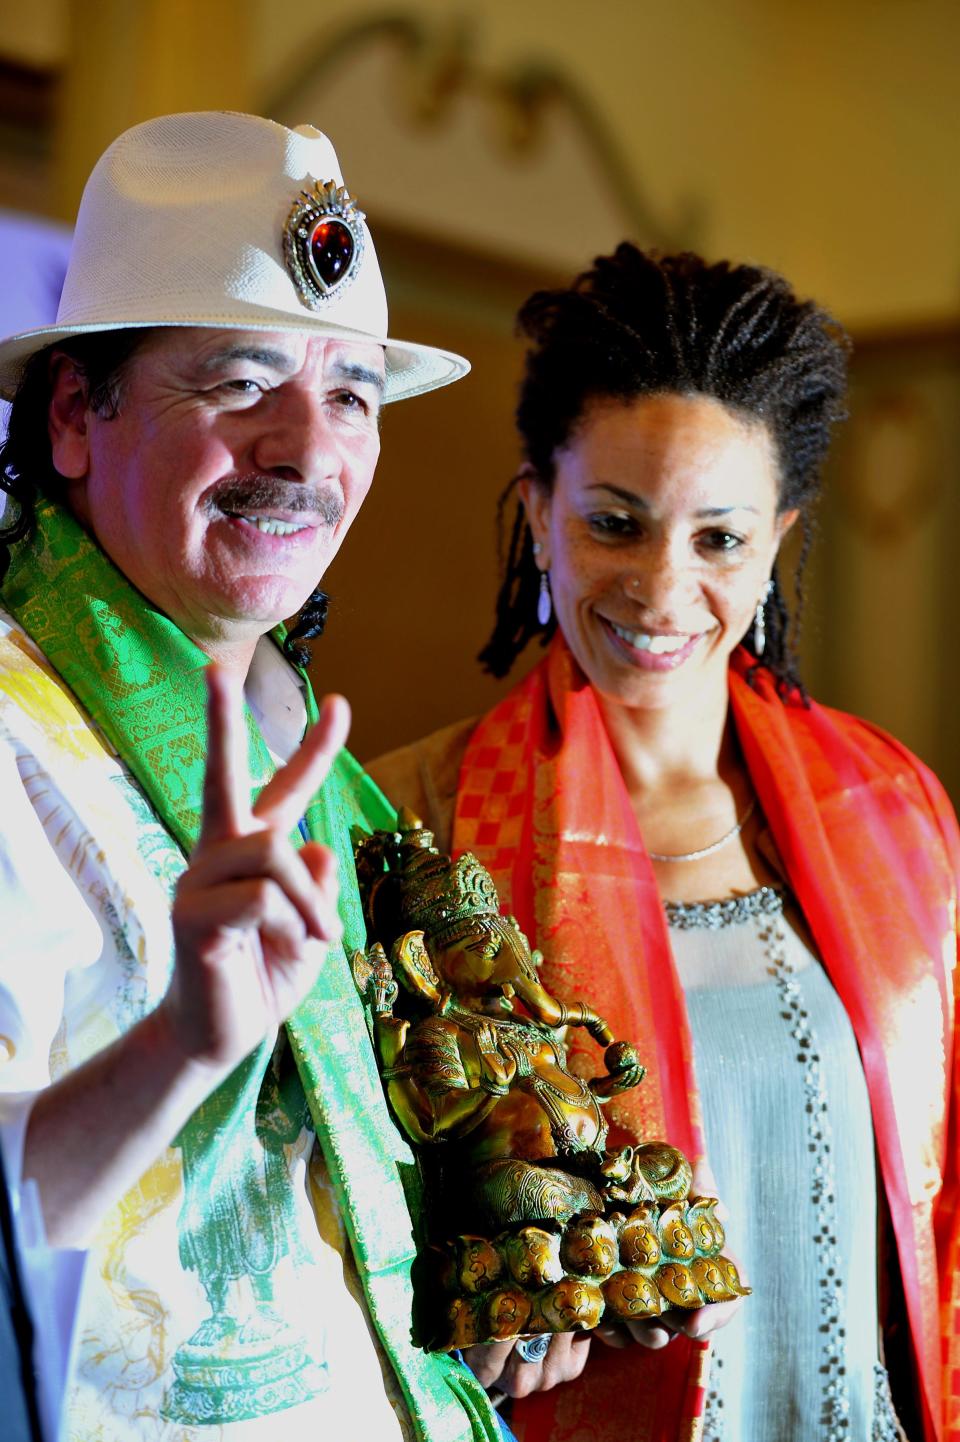 Carlos Santana and his wife, drummer Cindy Blackman Santana (shown here in 2012), often perform together. She is featured in the new documentary about the musician's life, "Carlos."